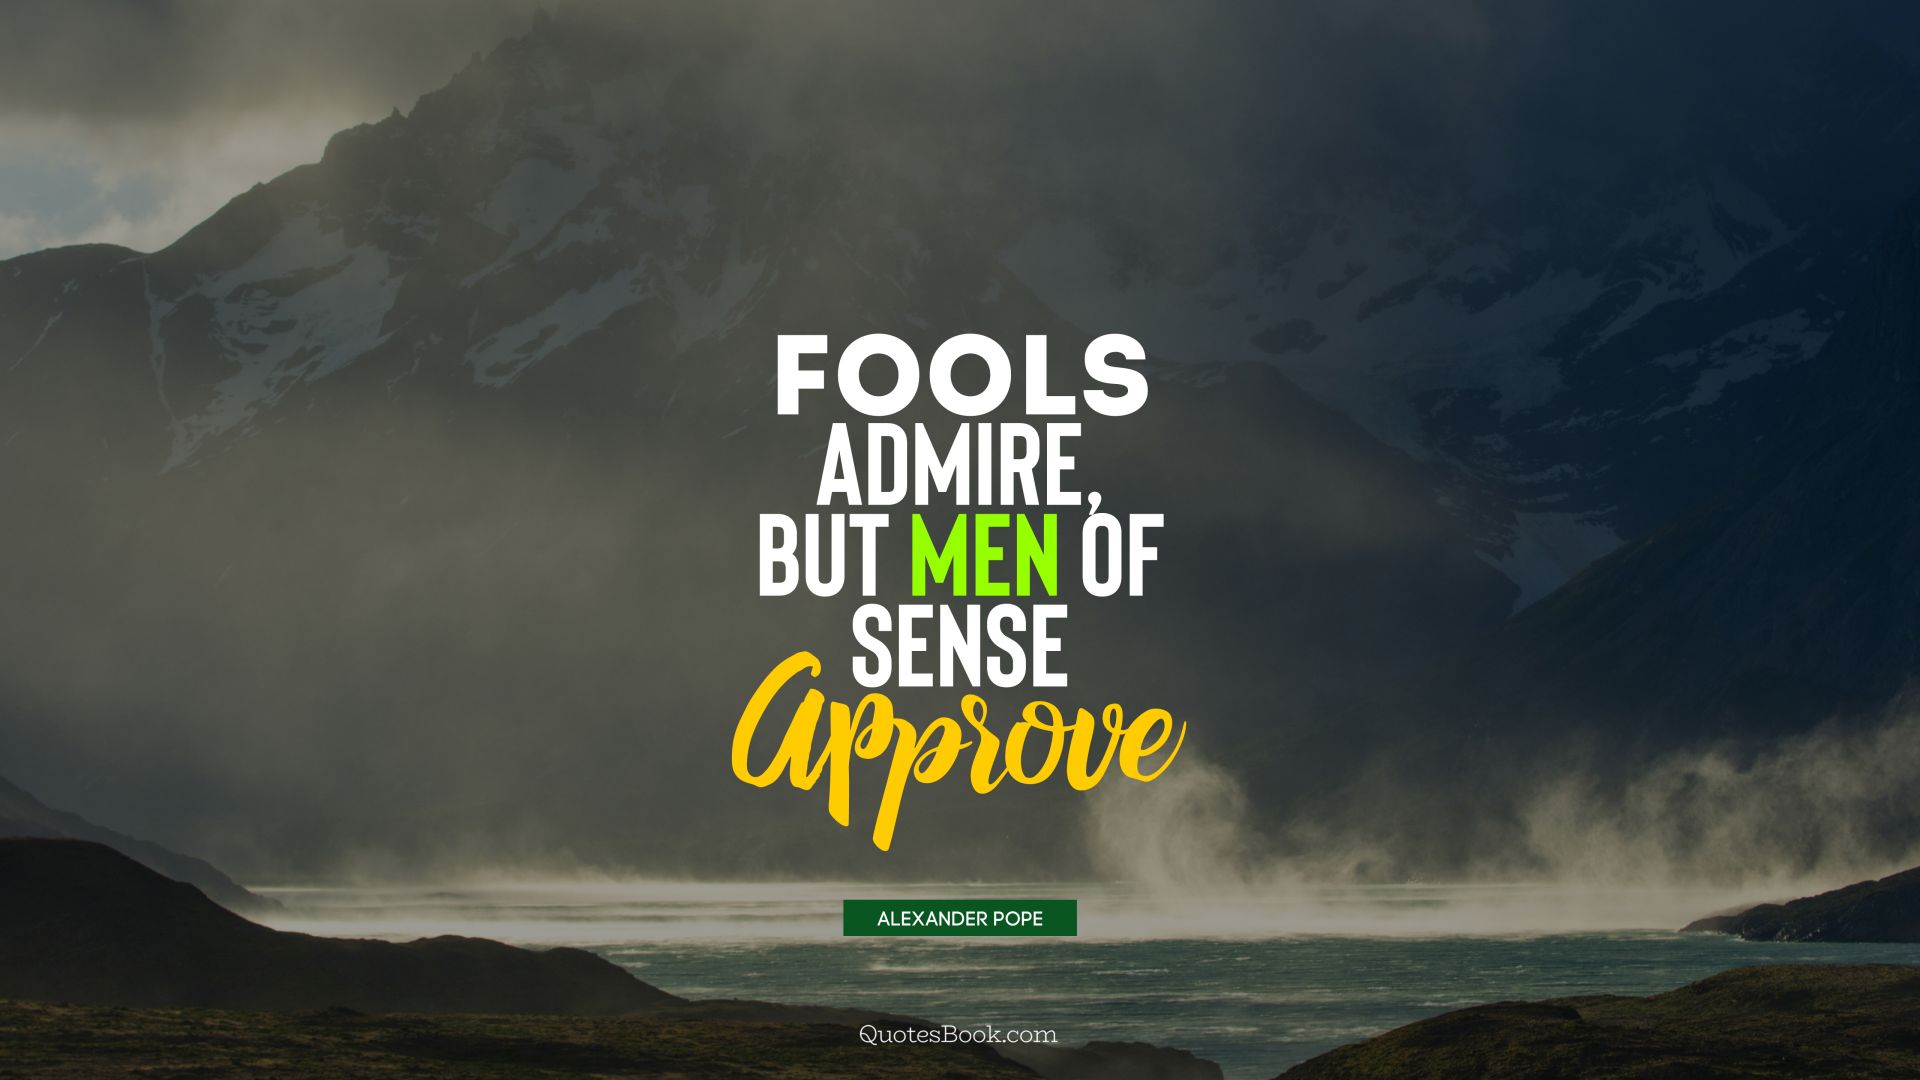 Fools admire, but men of sense approve. - Quote by Alexander Pope